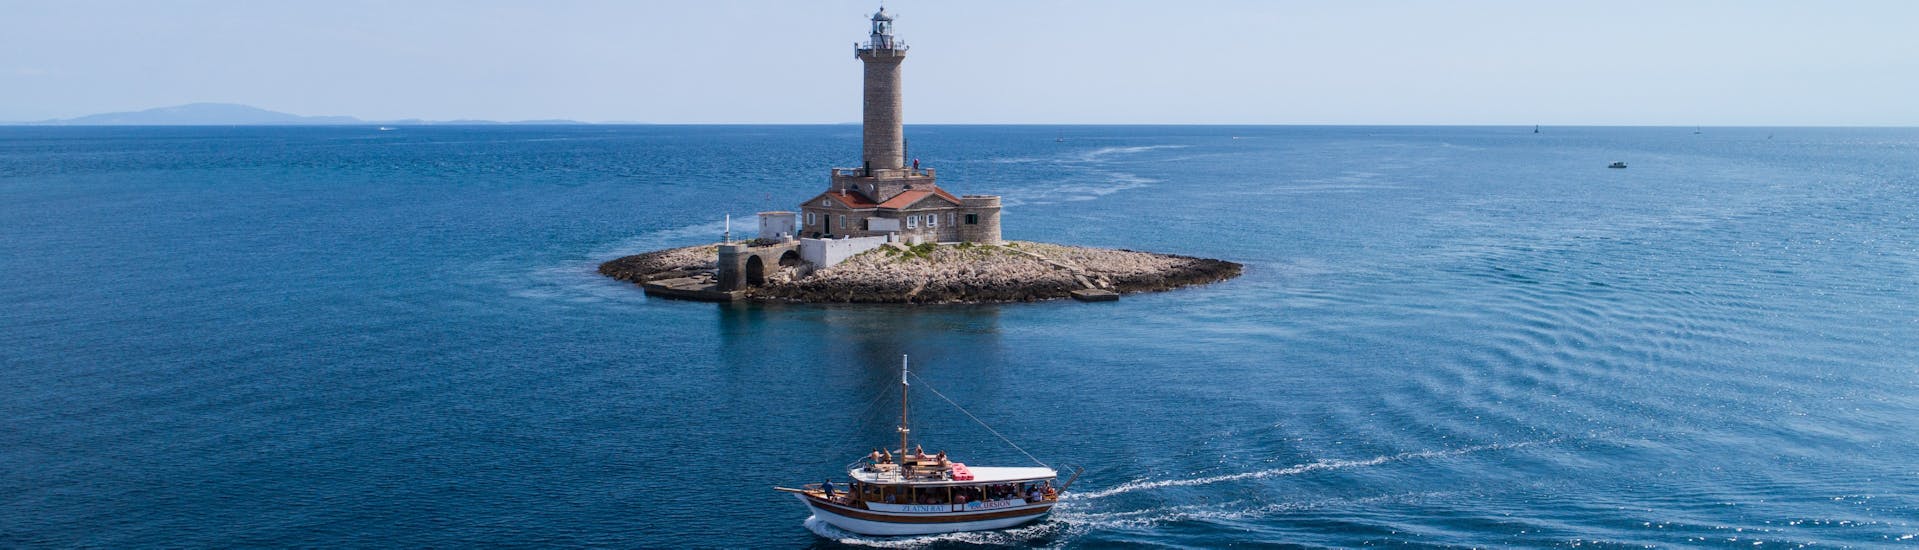 Picture of the boat in front of Porer Lighthouse, during the Boat Trip around the Medulin Archipelago with Lunch organized by Tajana & Zlatni Rat Excursions Medulin.